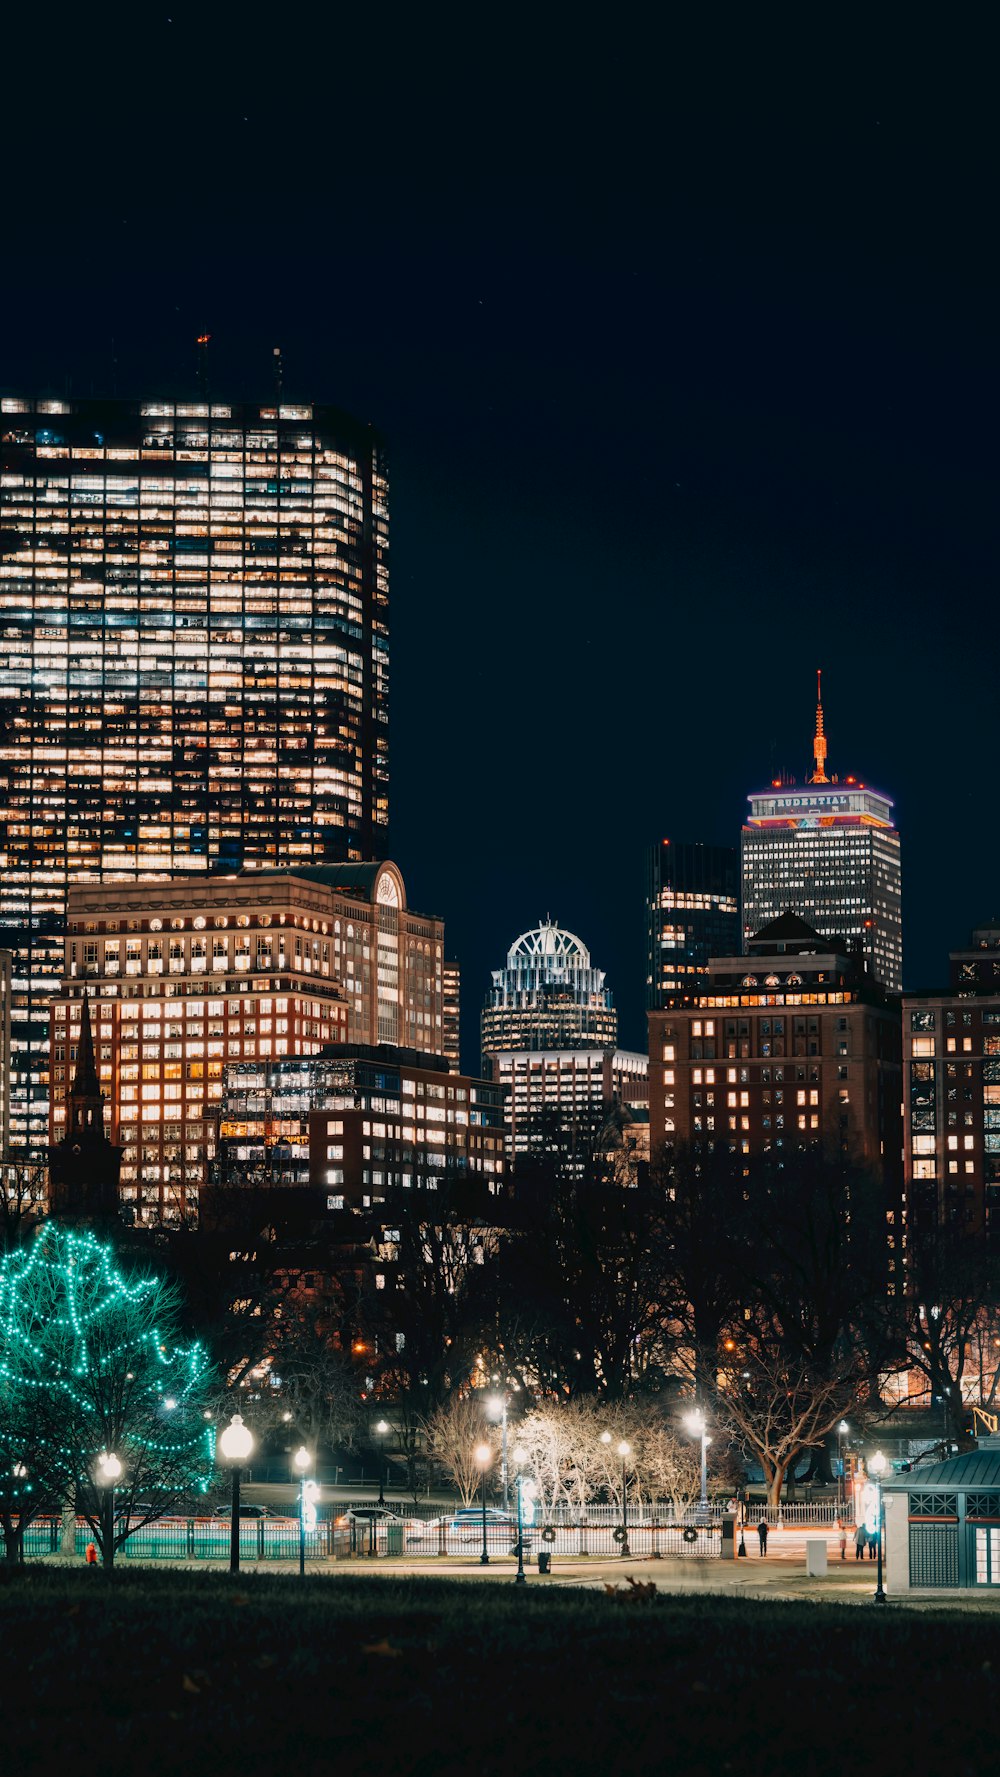 a city skyline at night with a lit up christmas tree in the foreground